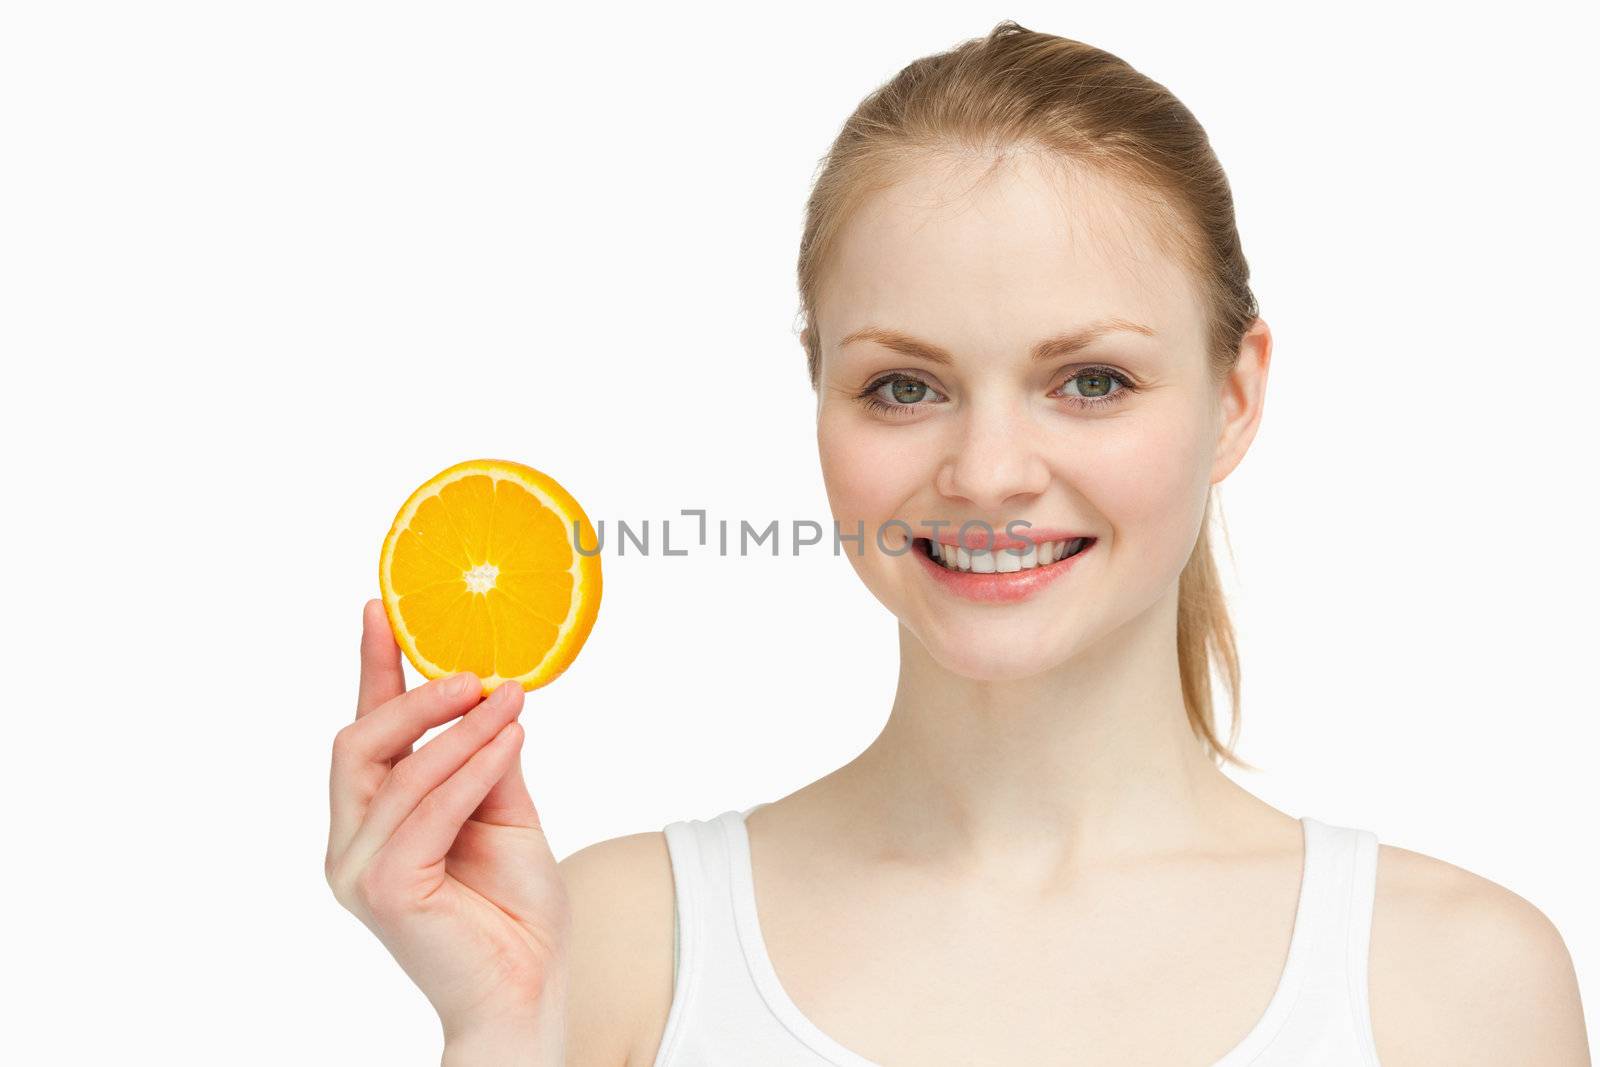 Cheerful woman presenting an orange slice against white background